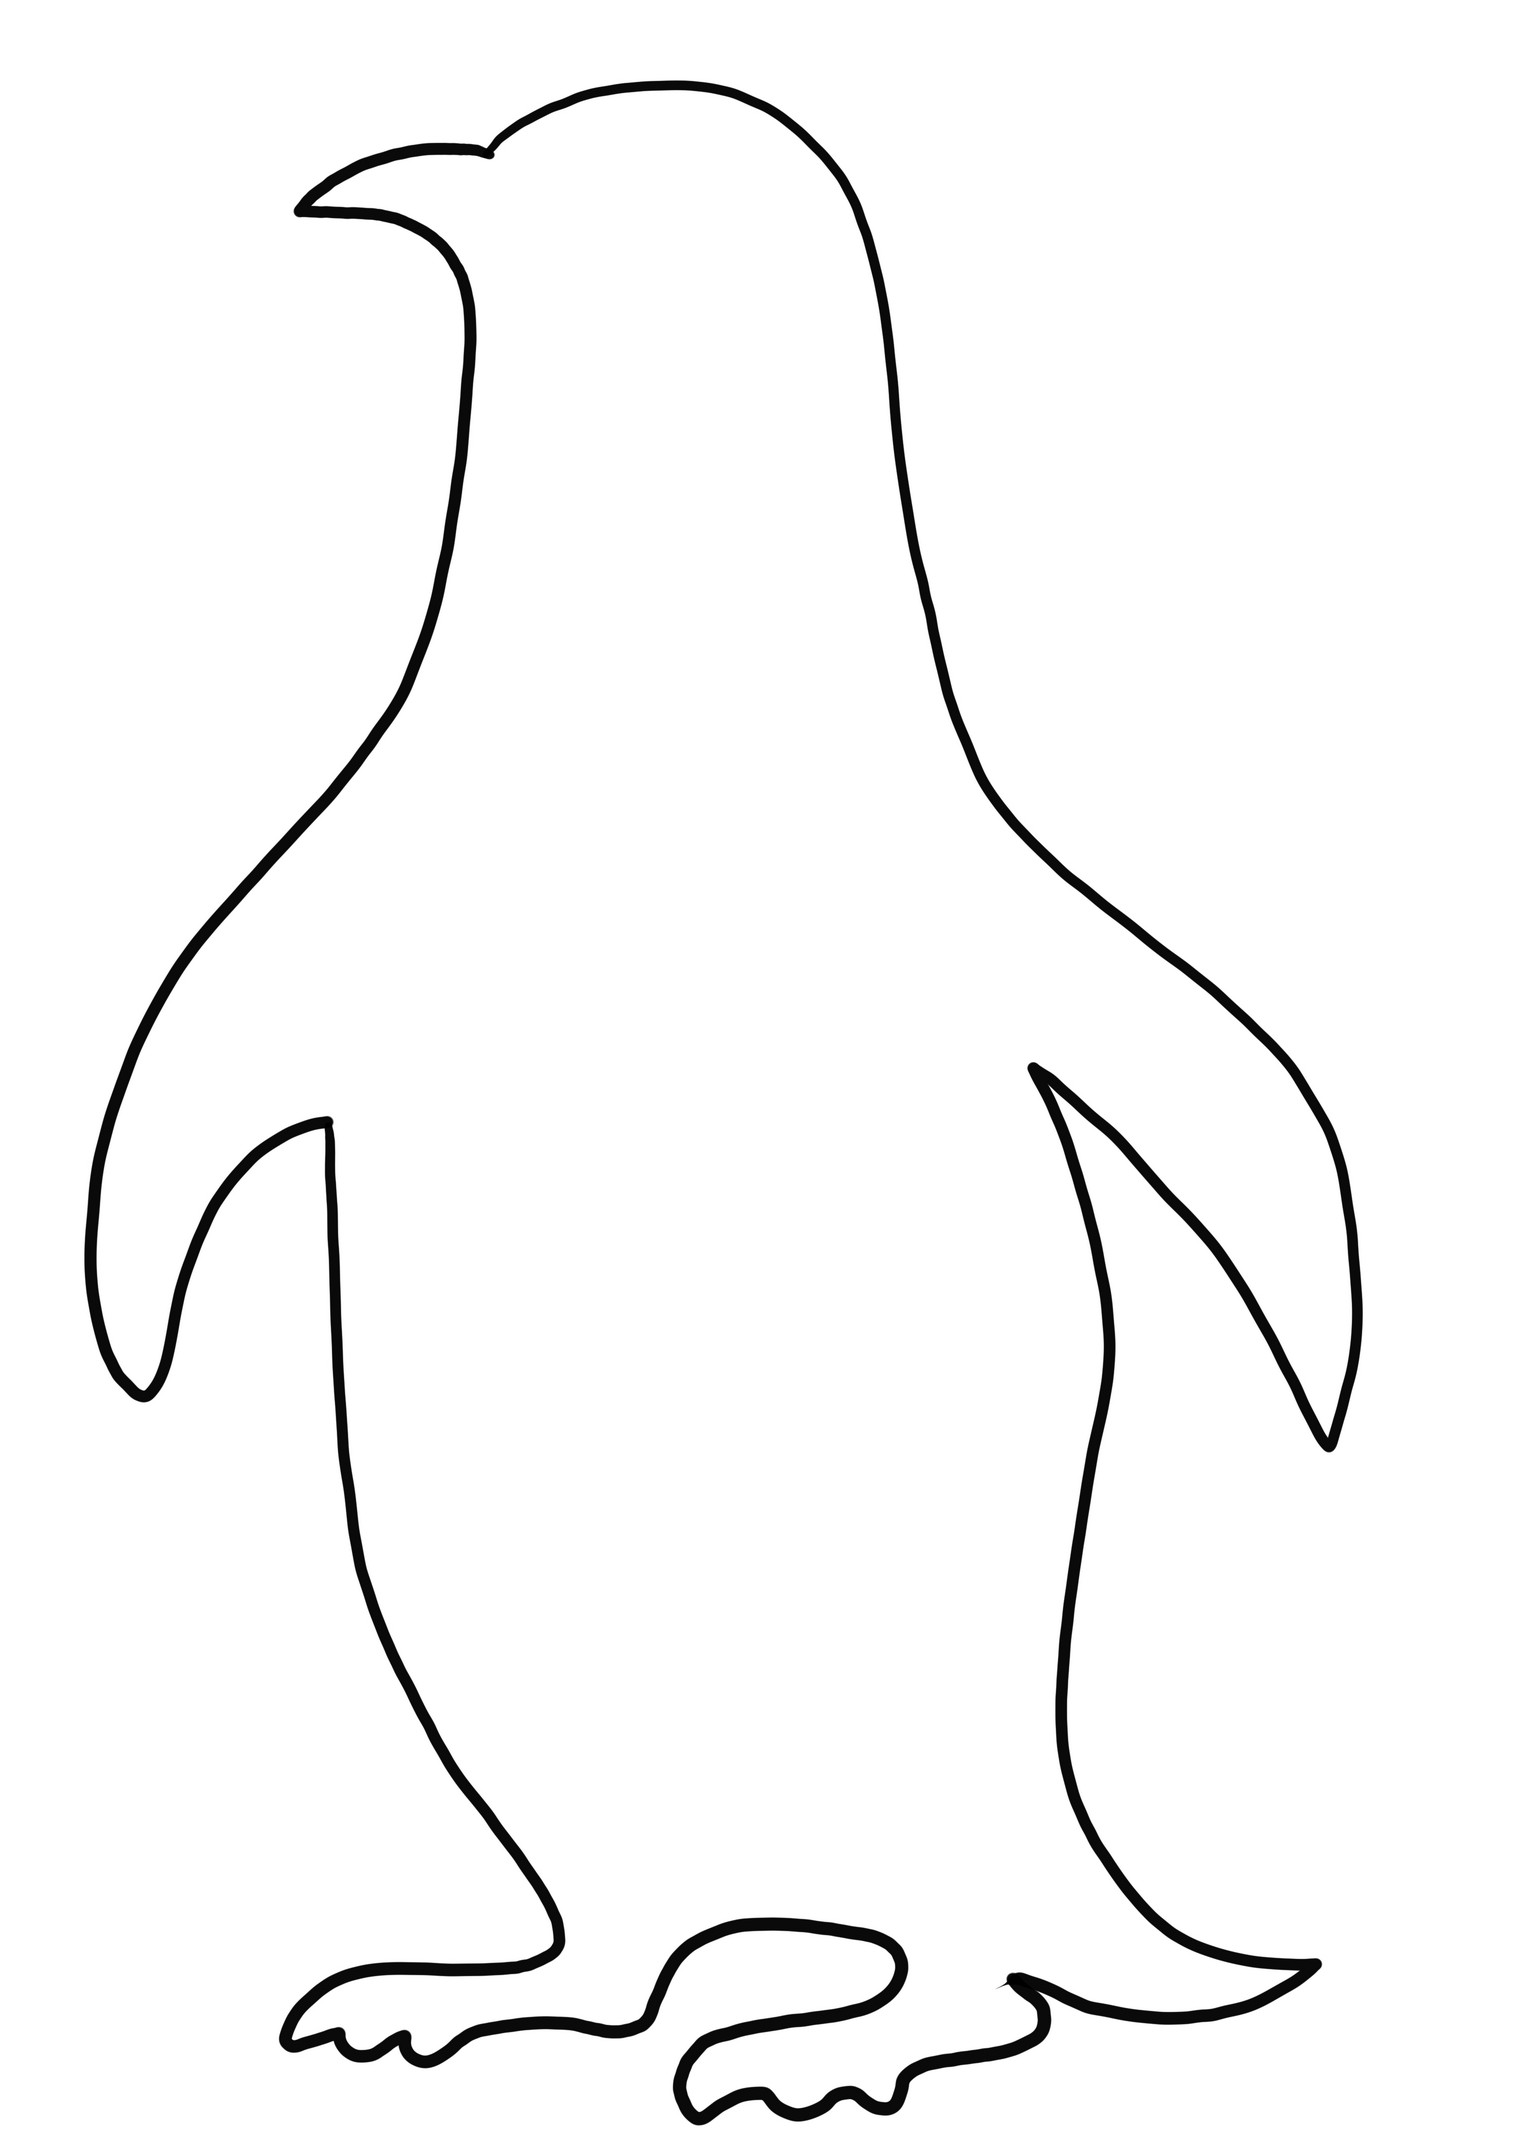 Penguin silhouette coloring page